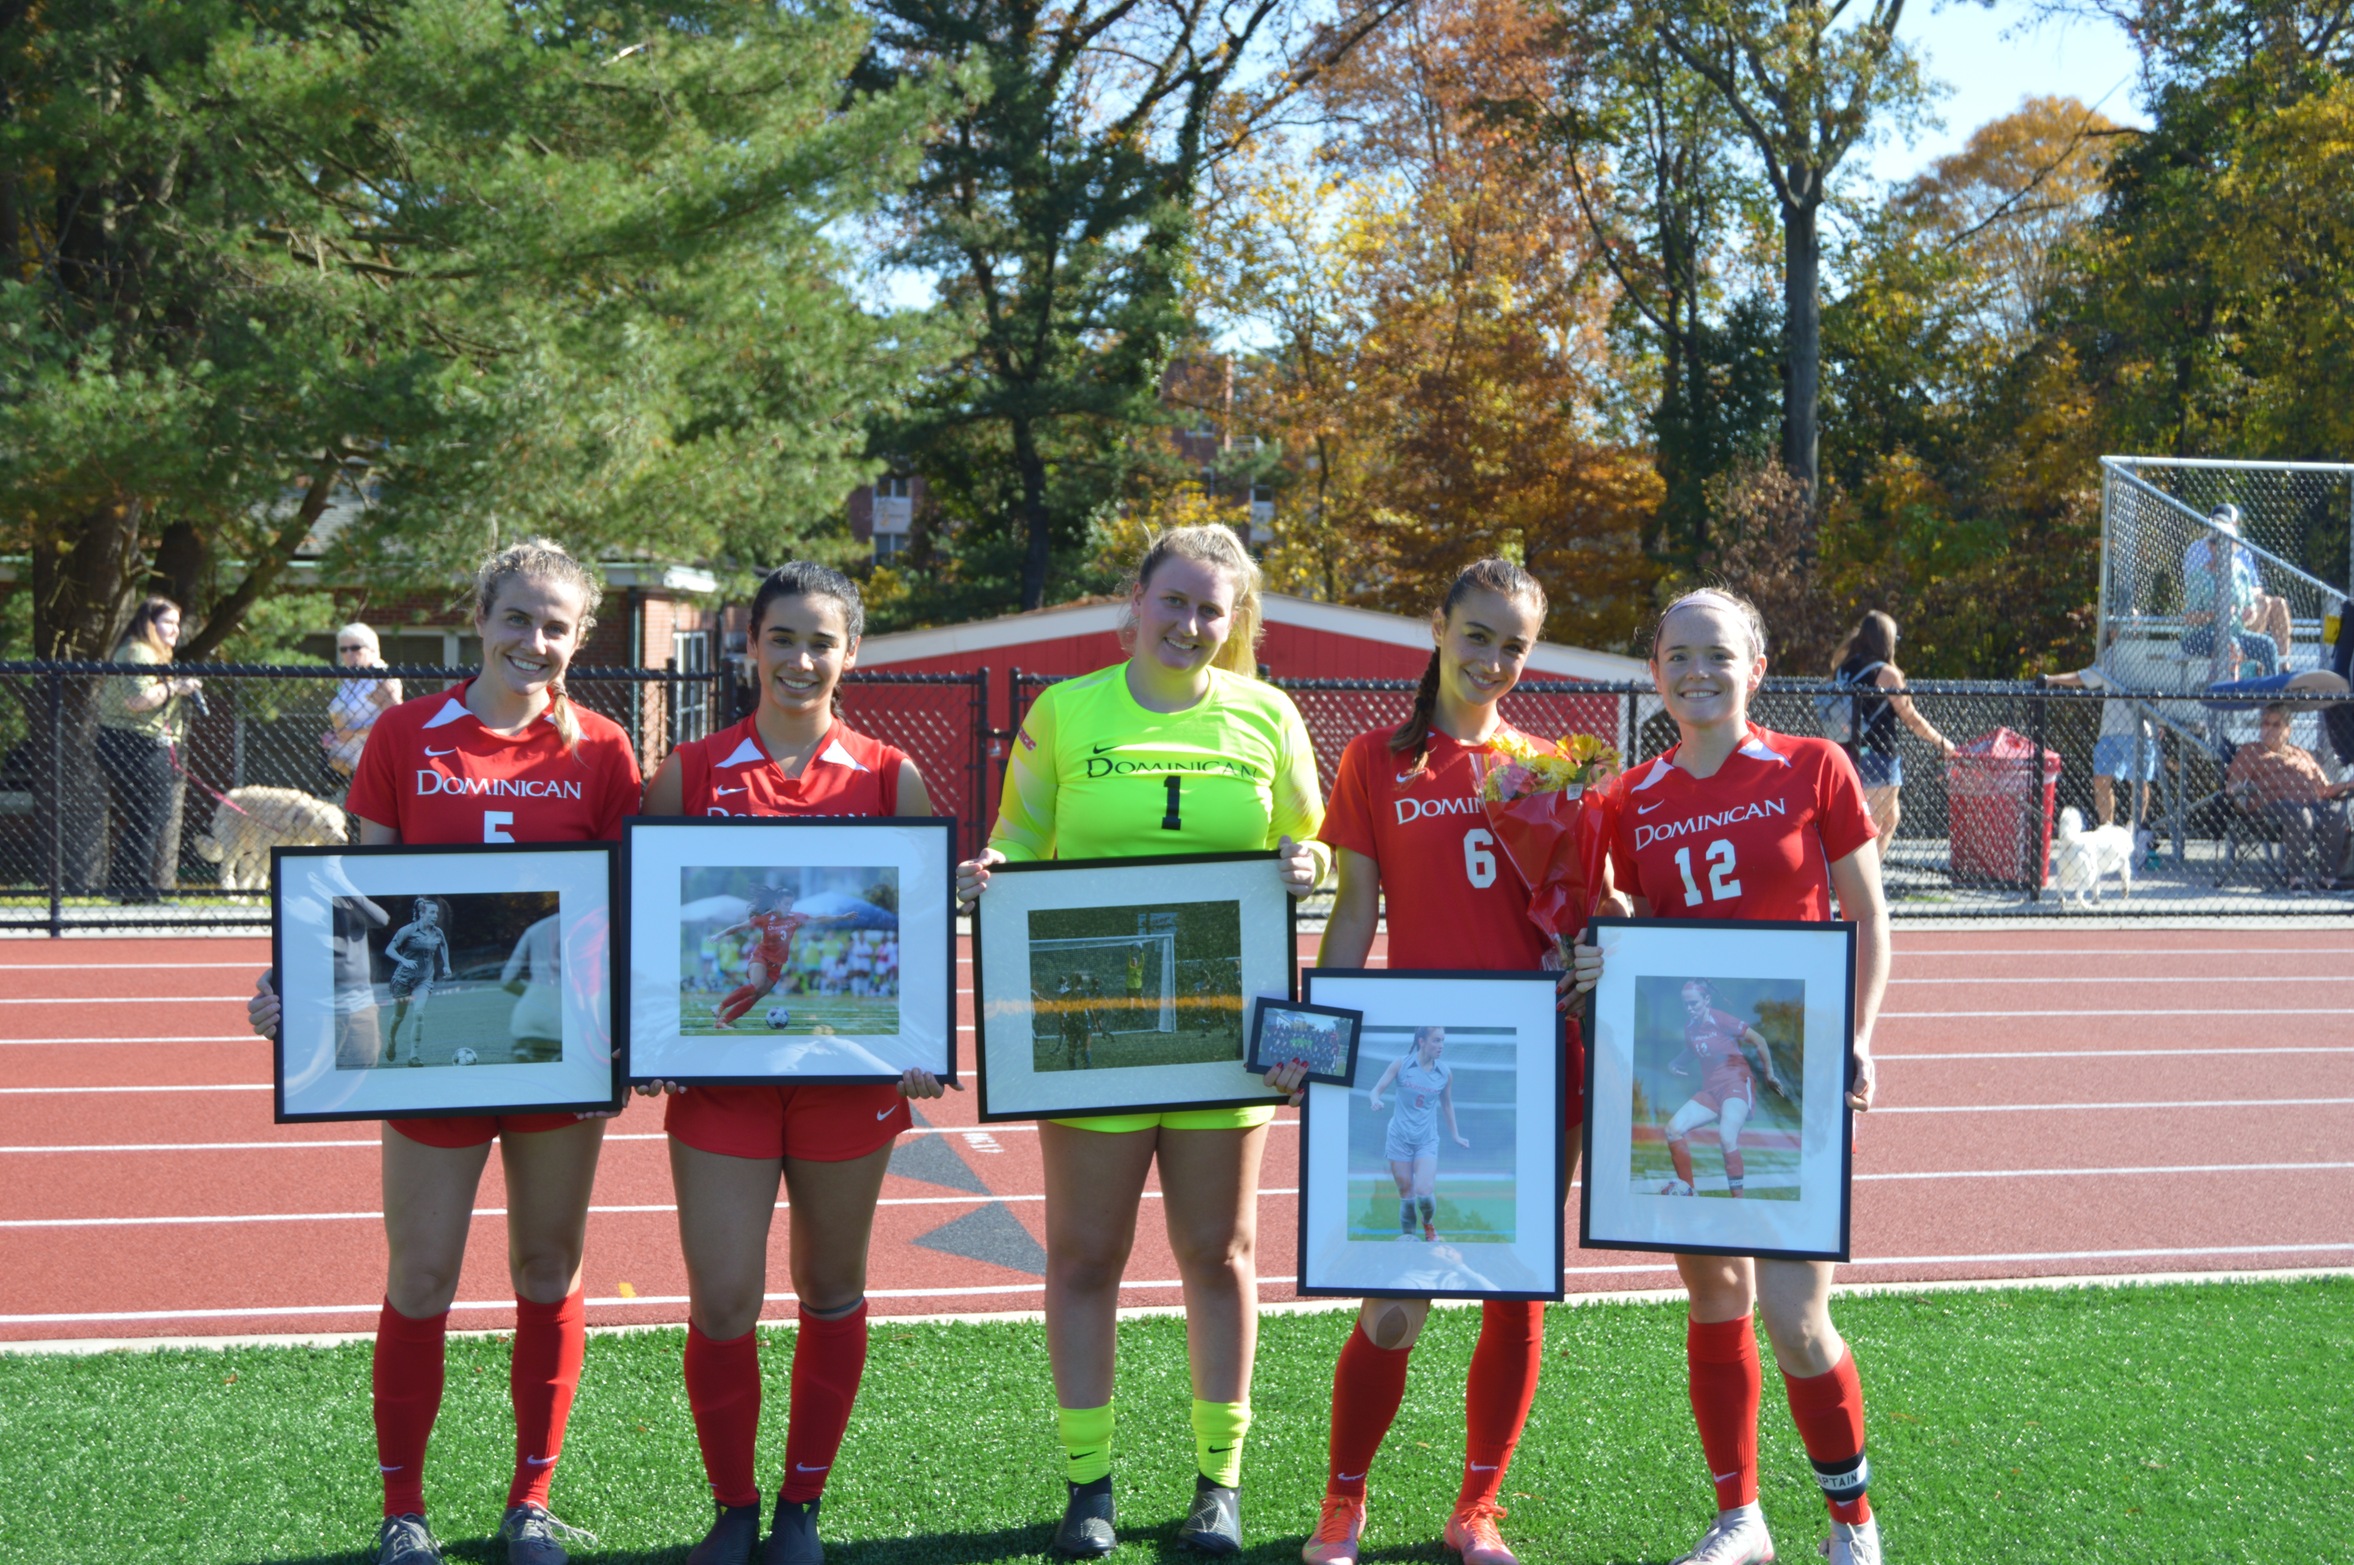 WOMEN'S SOCCER RALLY TO DEFEAT GRIFFINS ON SENIOR DAY